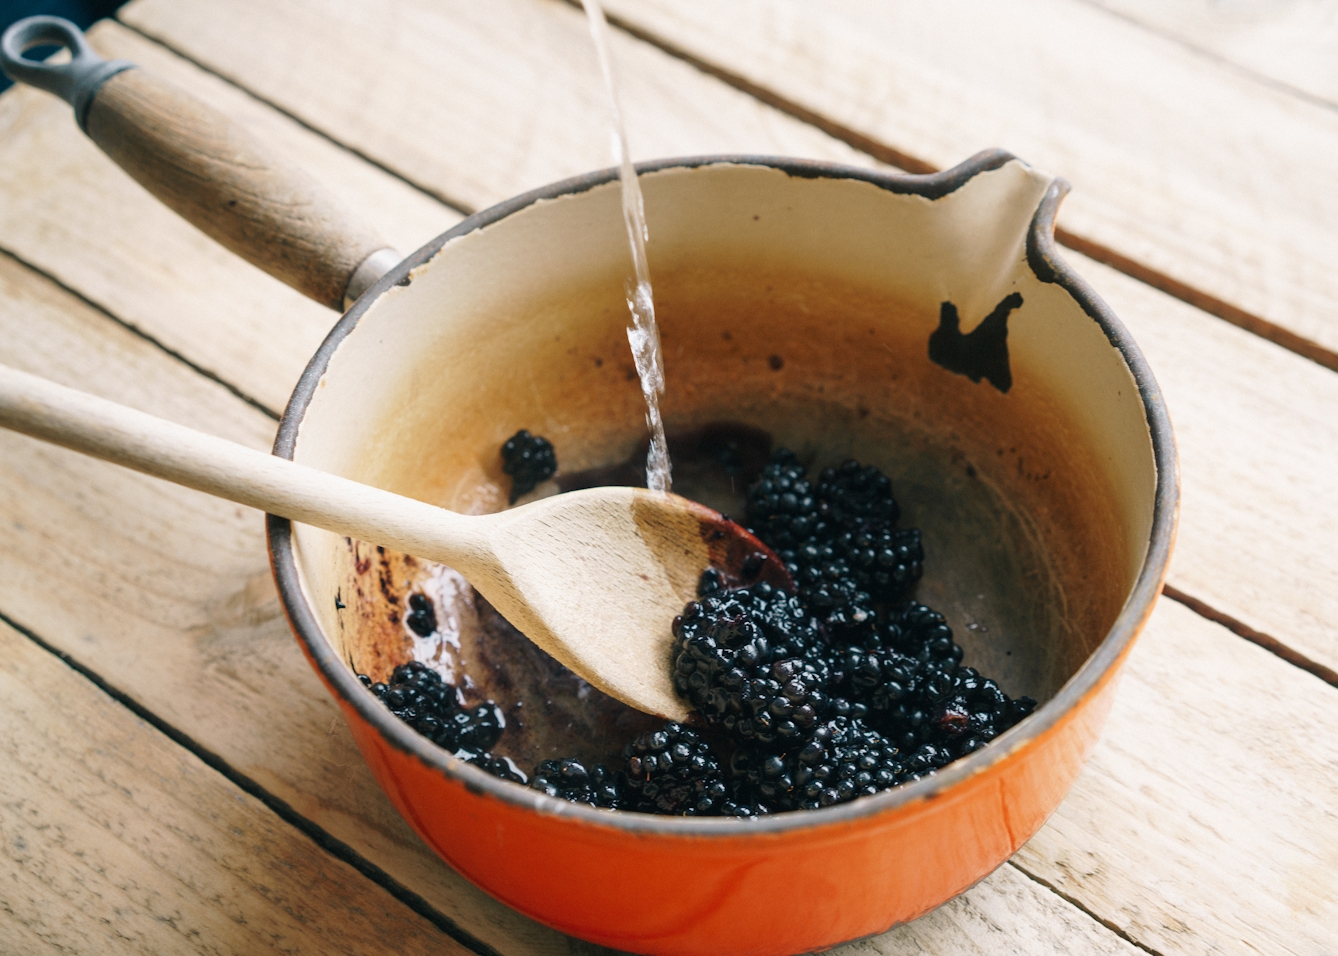 Photograph of a well worn cast iron and enamel coated saucepan with a wooden handle, standing on a table top made of worn wooden planks. In the saucepan are blackberries with boiling liquid being poured over them. A wooden spoon stirs the mixture.